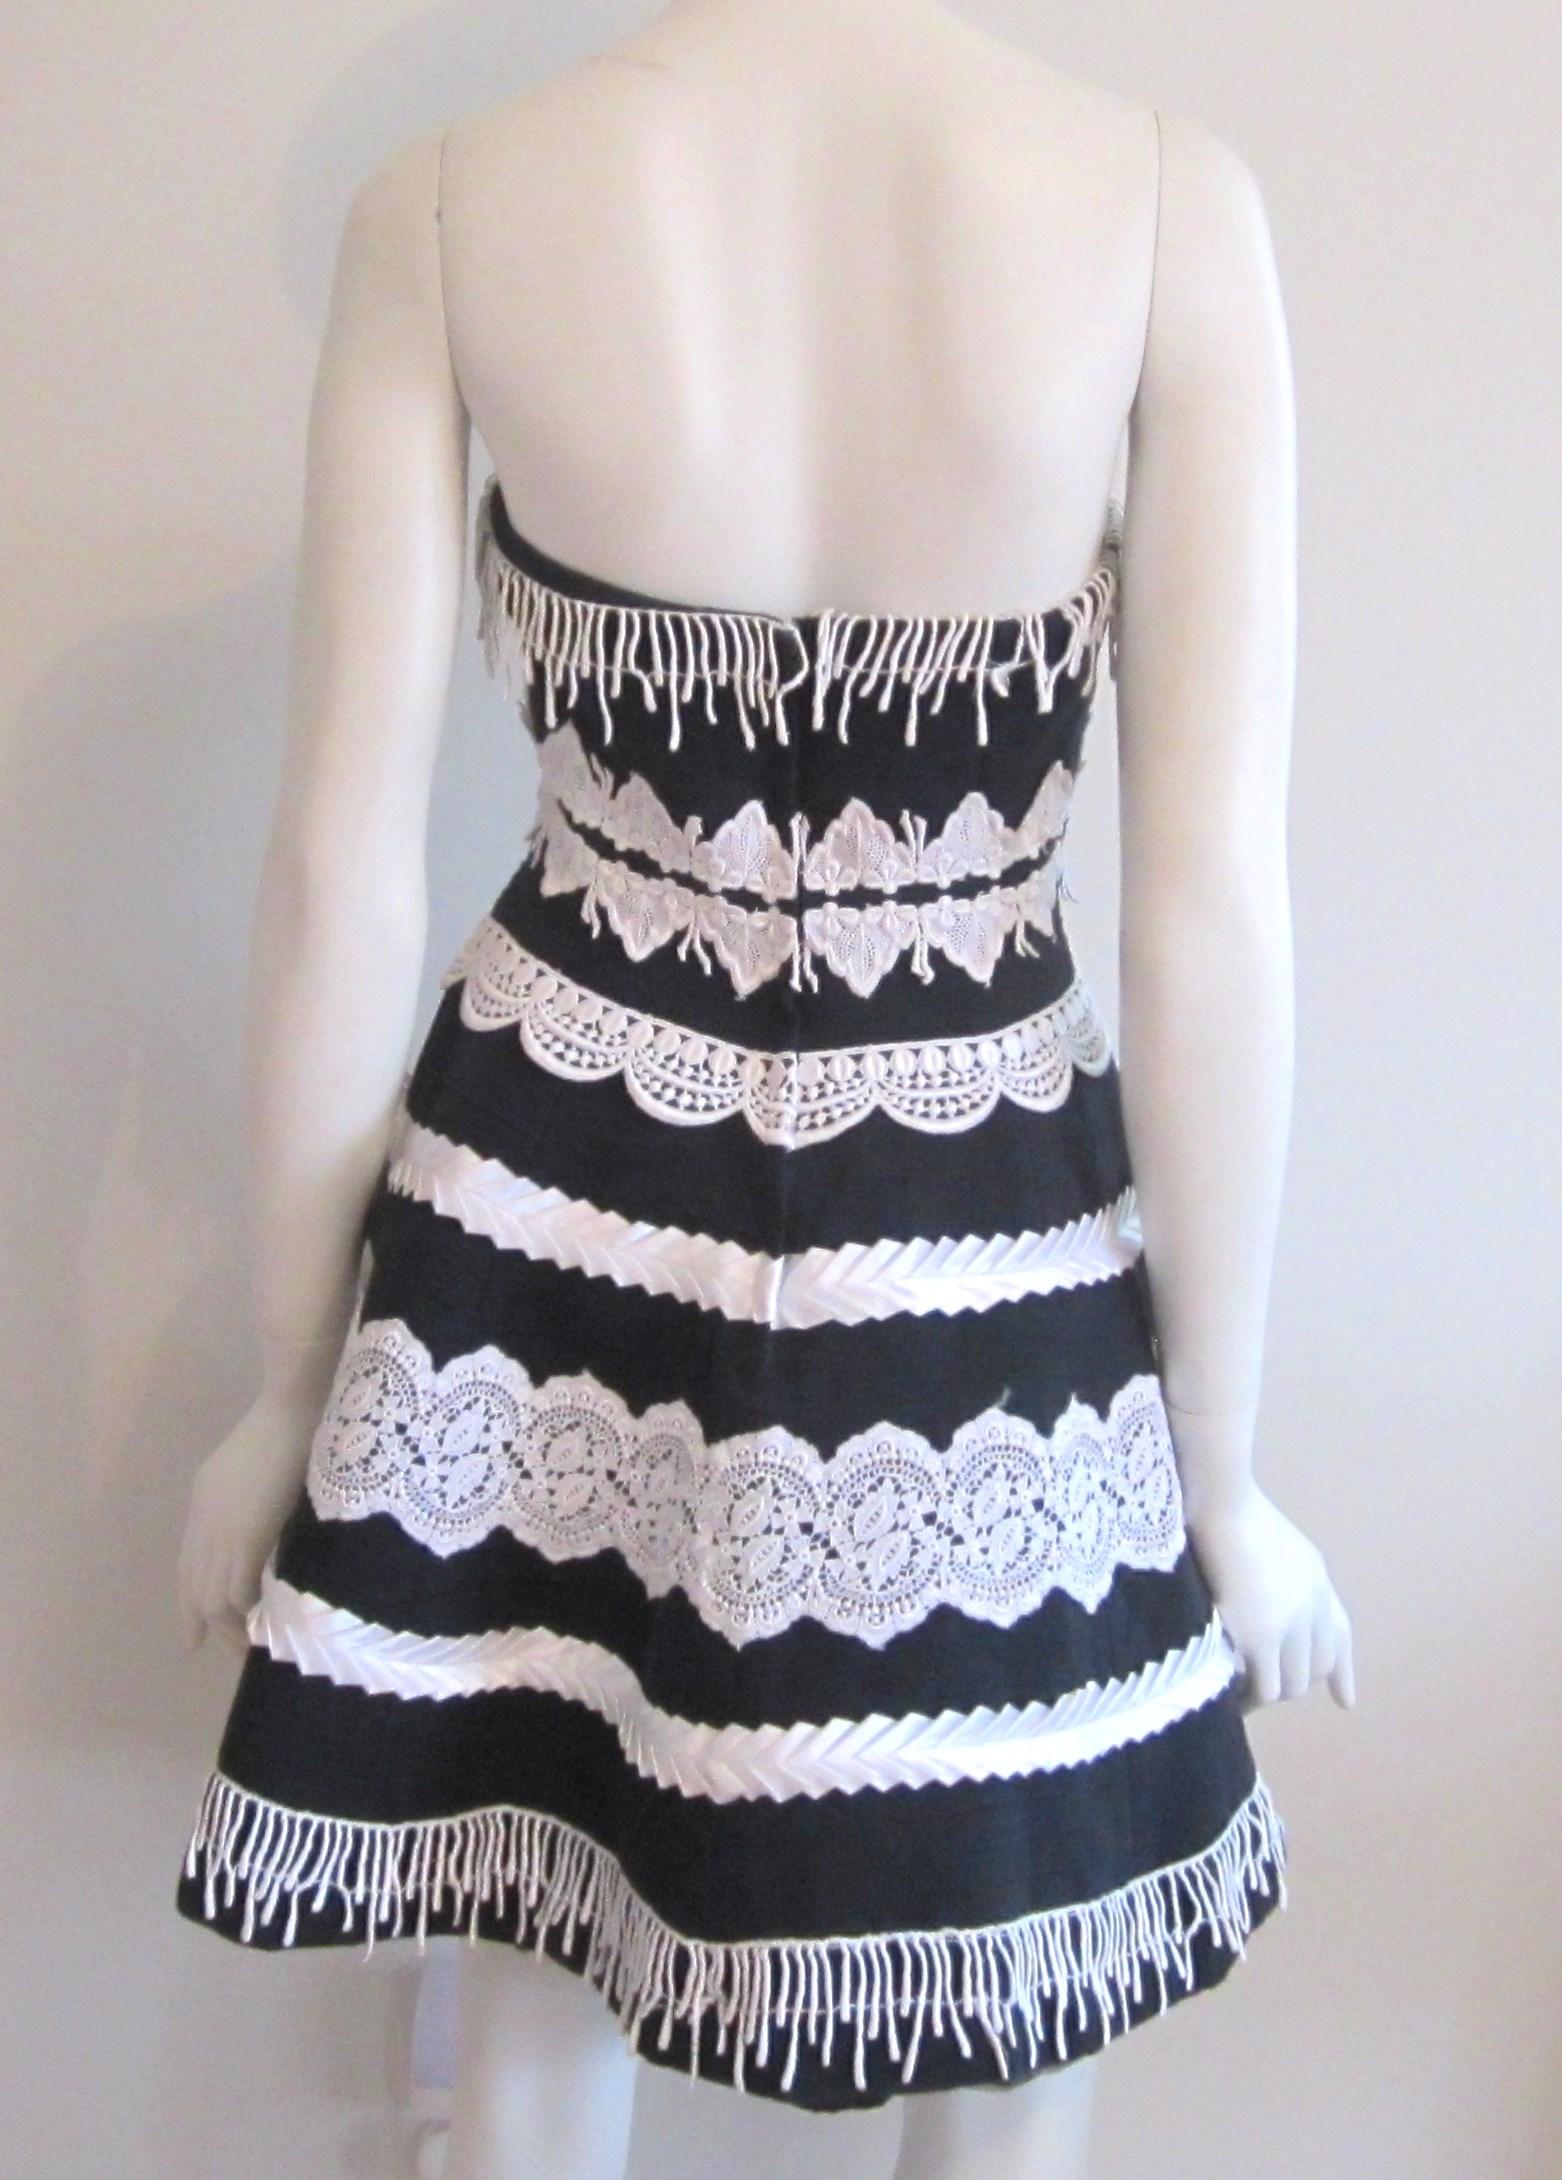  Victor Costa Black & White Strapless Cocktail Dress, 1980s  For Sale 1